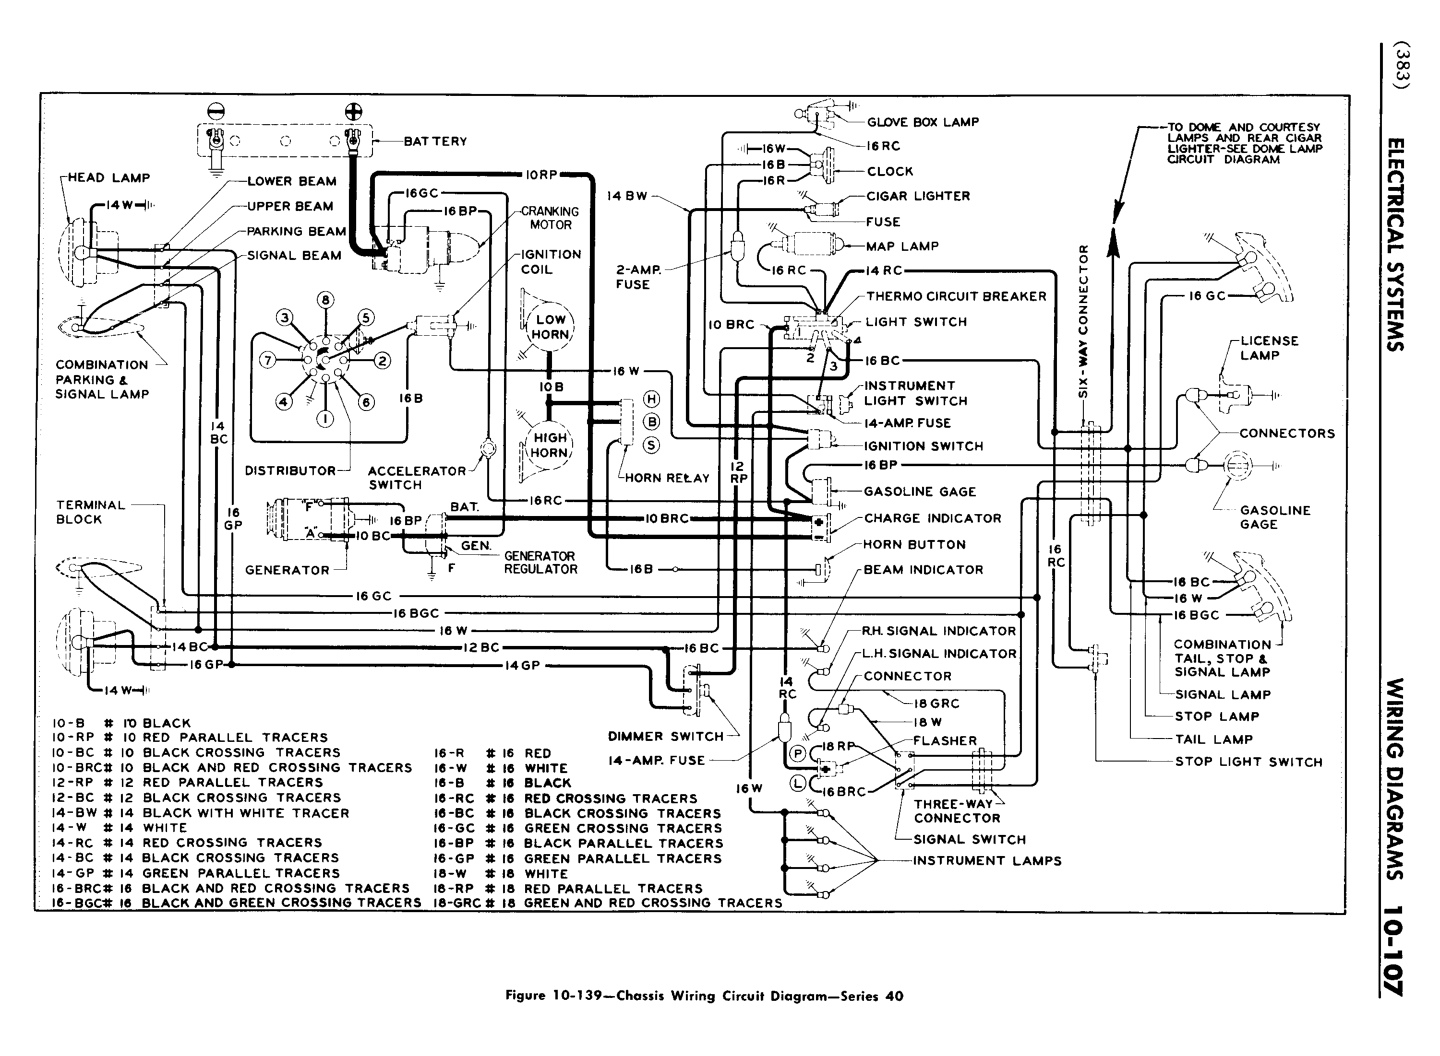 n_11 1948 Buick Shop Manual - Electrical Systems-107-107.jpg